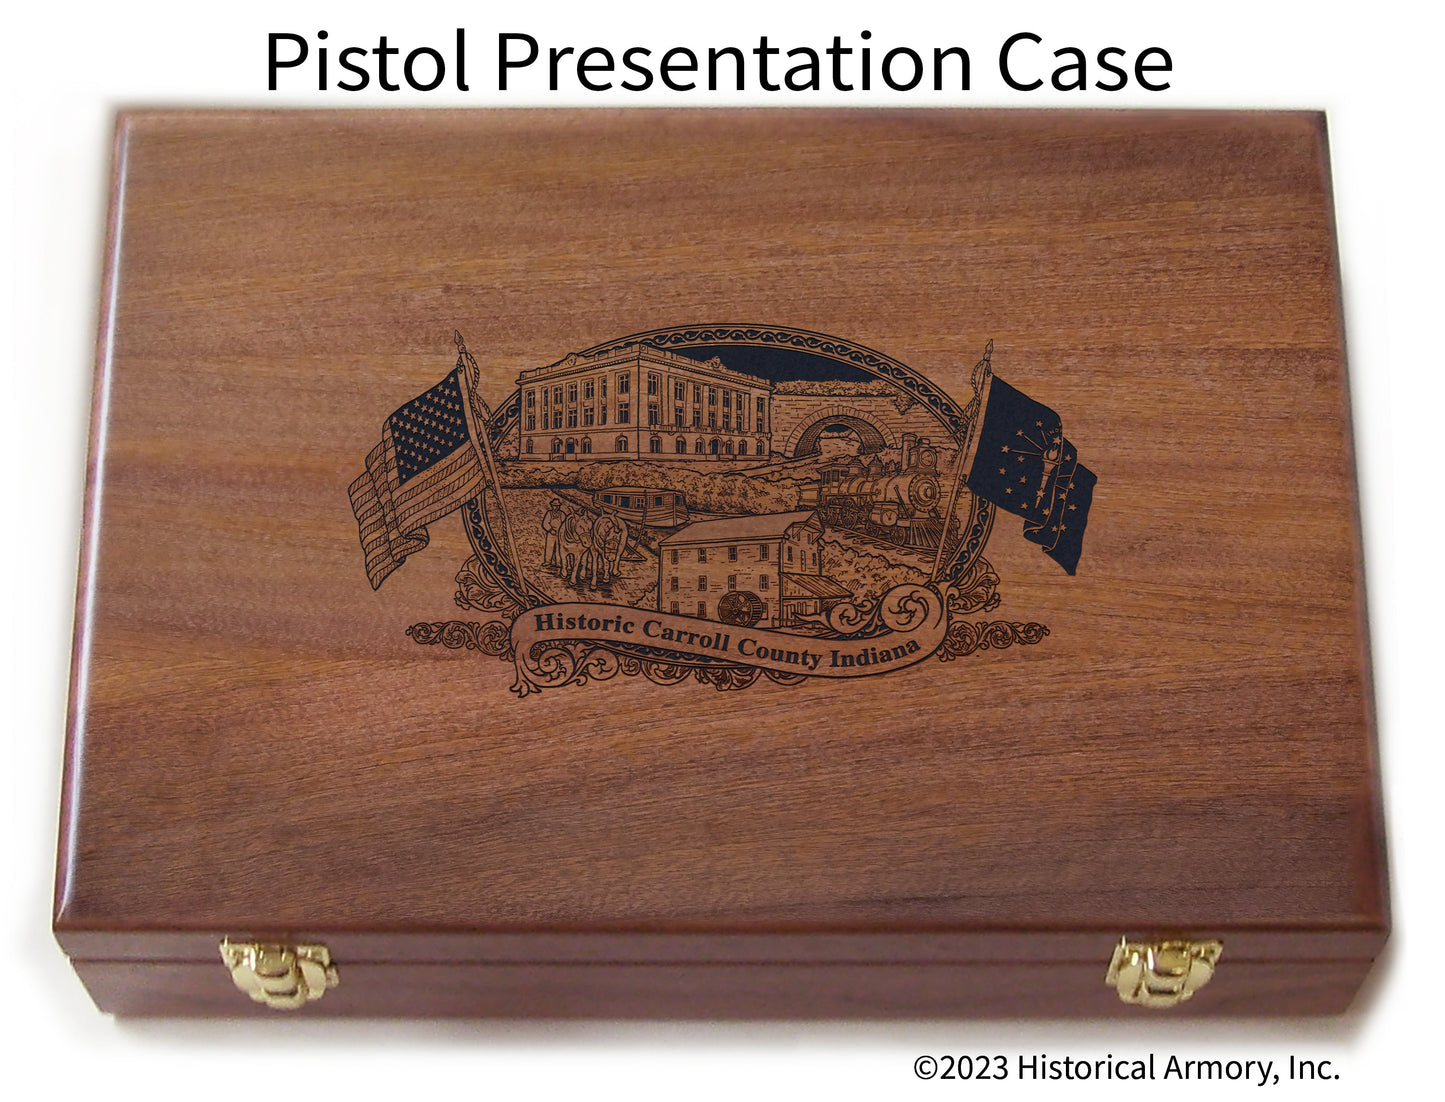 Carroll County Indiana Engraved .45 Auto Ruger 1911 Presentation Case